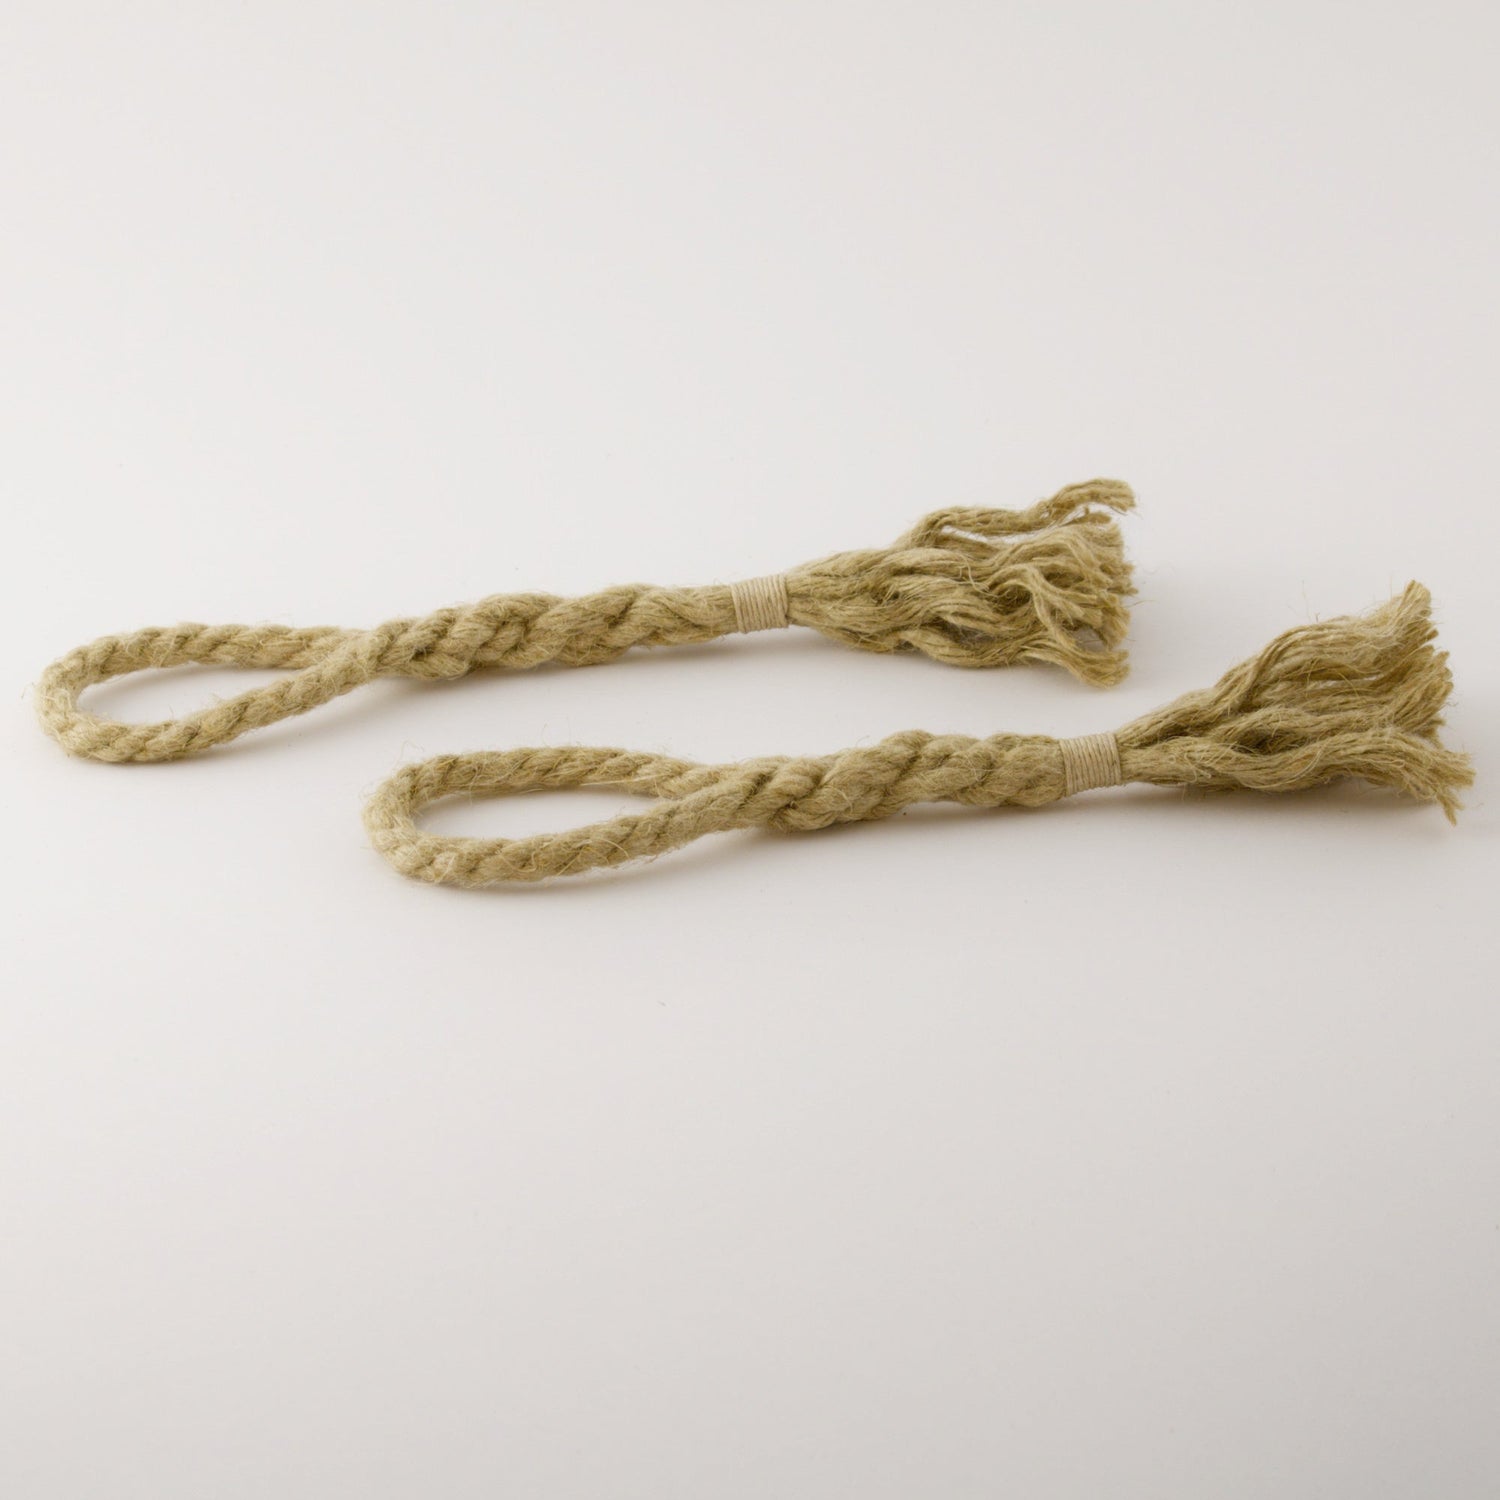 organic hemp rope cat toys made by small family business